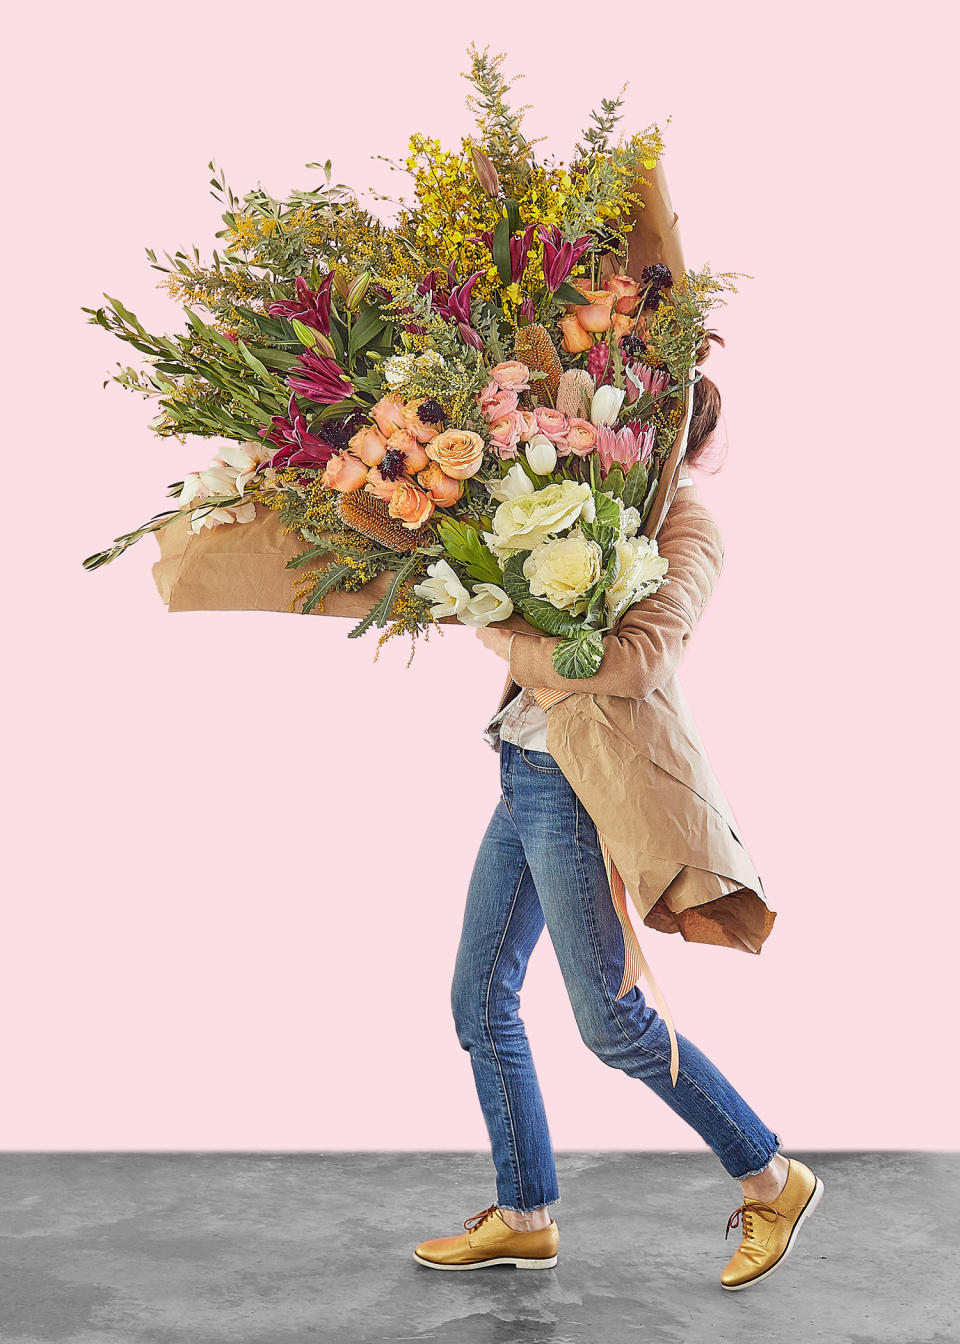 Flowers may be a cliche Valentine's Day gift, but that doesn't mean they aren't appreciated. And if you have a big love for your Valentine (and a big bankroll), you can drop $499 on this&nbsp;oversized&nbsp;<a href="https://www.bloomthat.com/flowers/the-most-extra" target="_blank">bouquet</a>. It comes with a huge bucket that can work as a vase. Bring along painkillers because you're going to need them after carrying this baby.